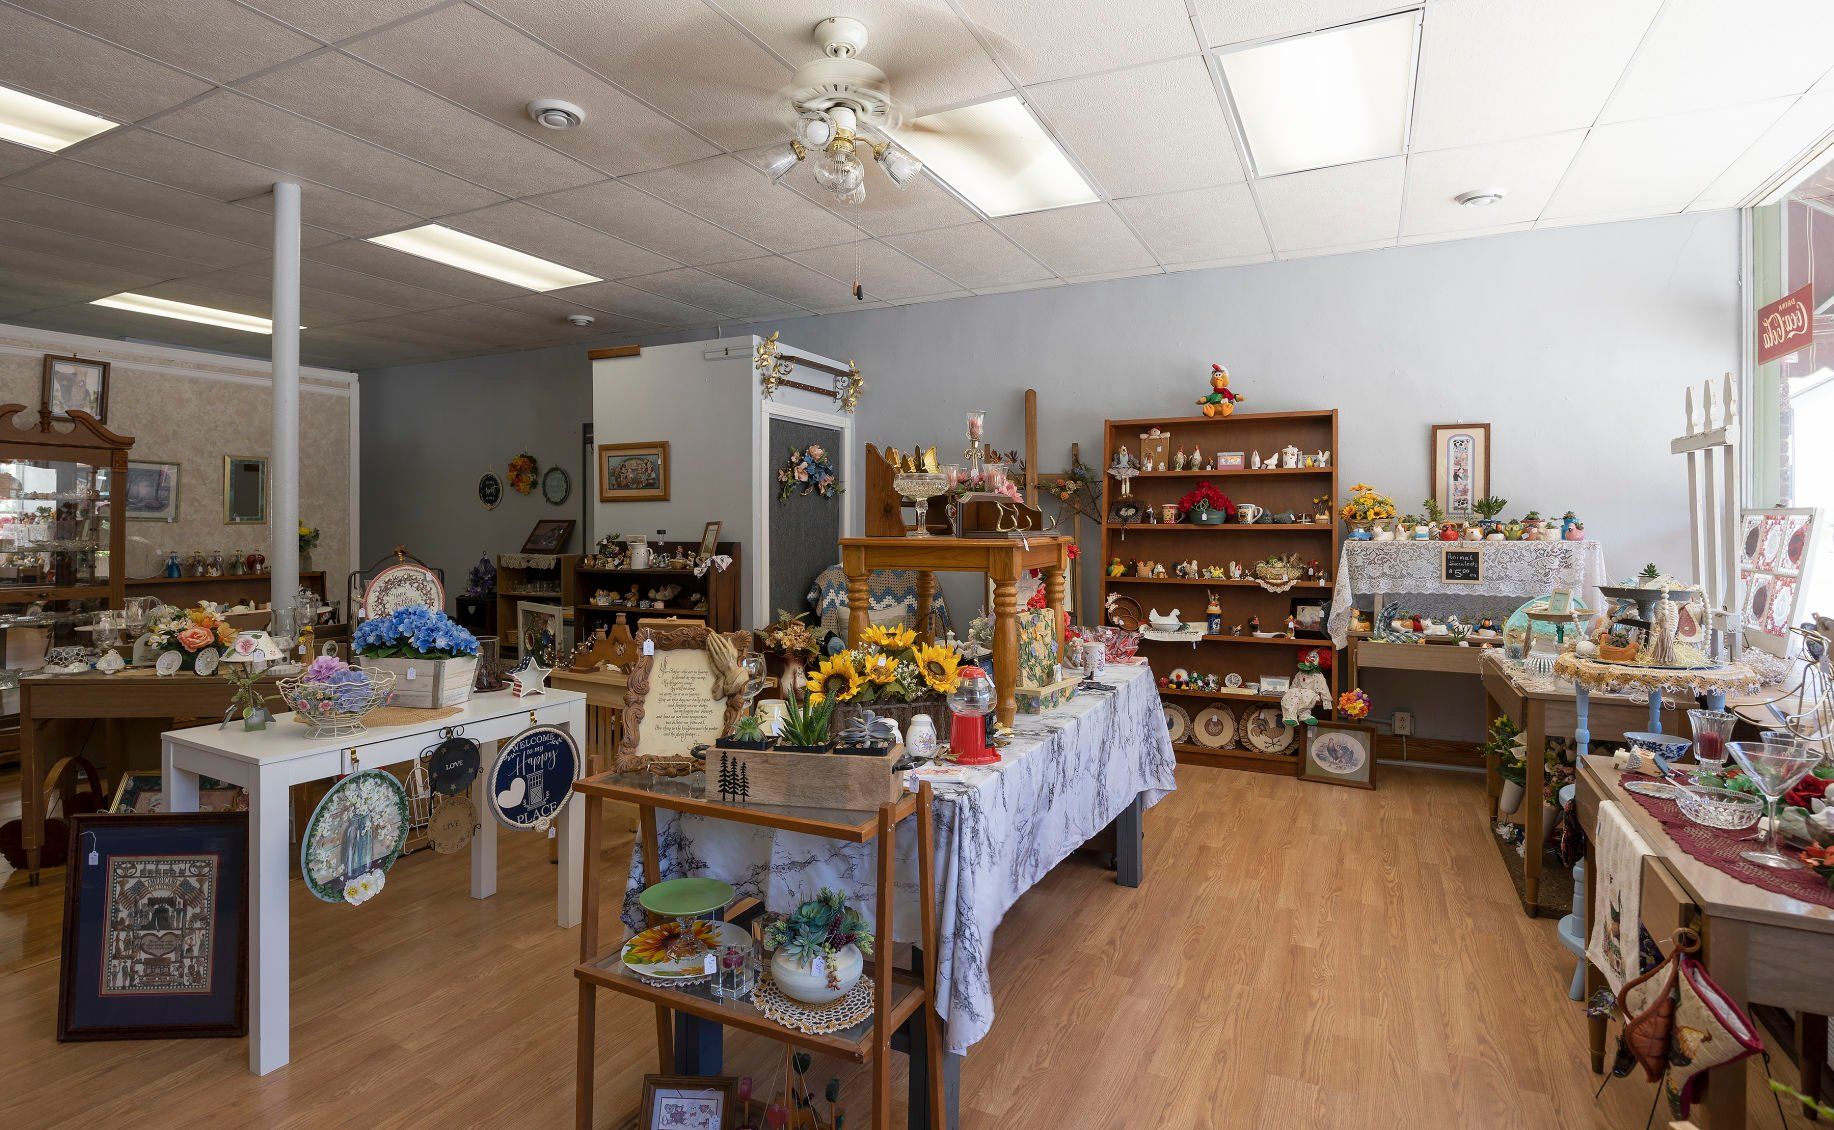 A Little Bit of Everything is a shop in Potosi, Wis., that focuses on gifts and craft items, as well as antiques and collectibles.    PHOTO CREDIT: Stephen Gassman